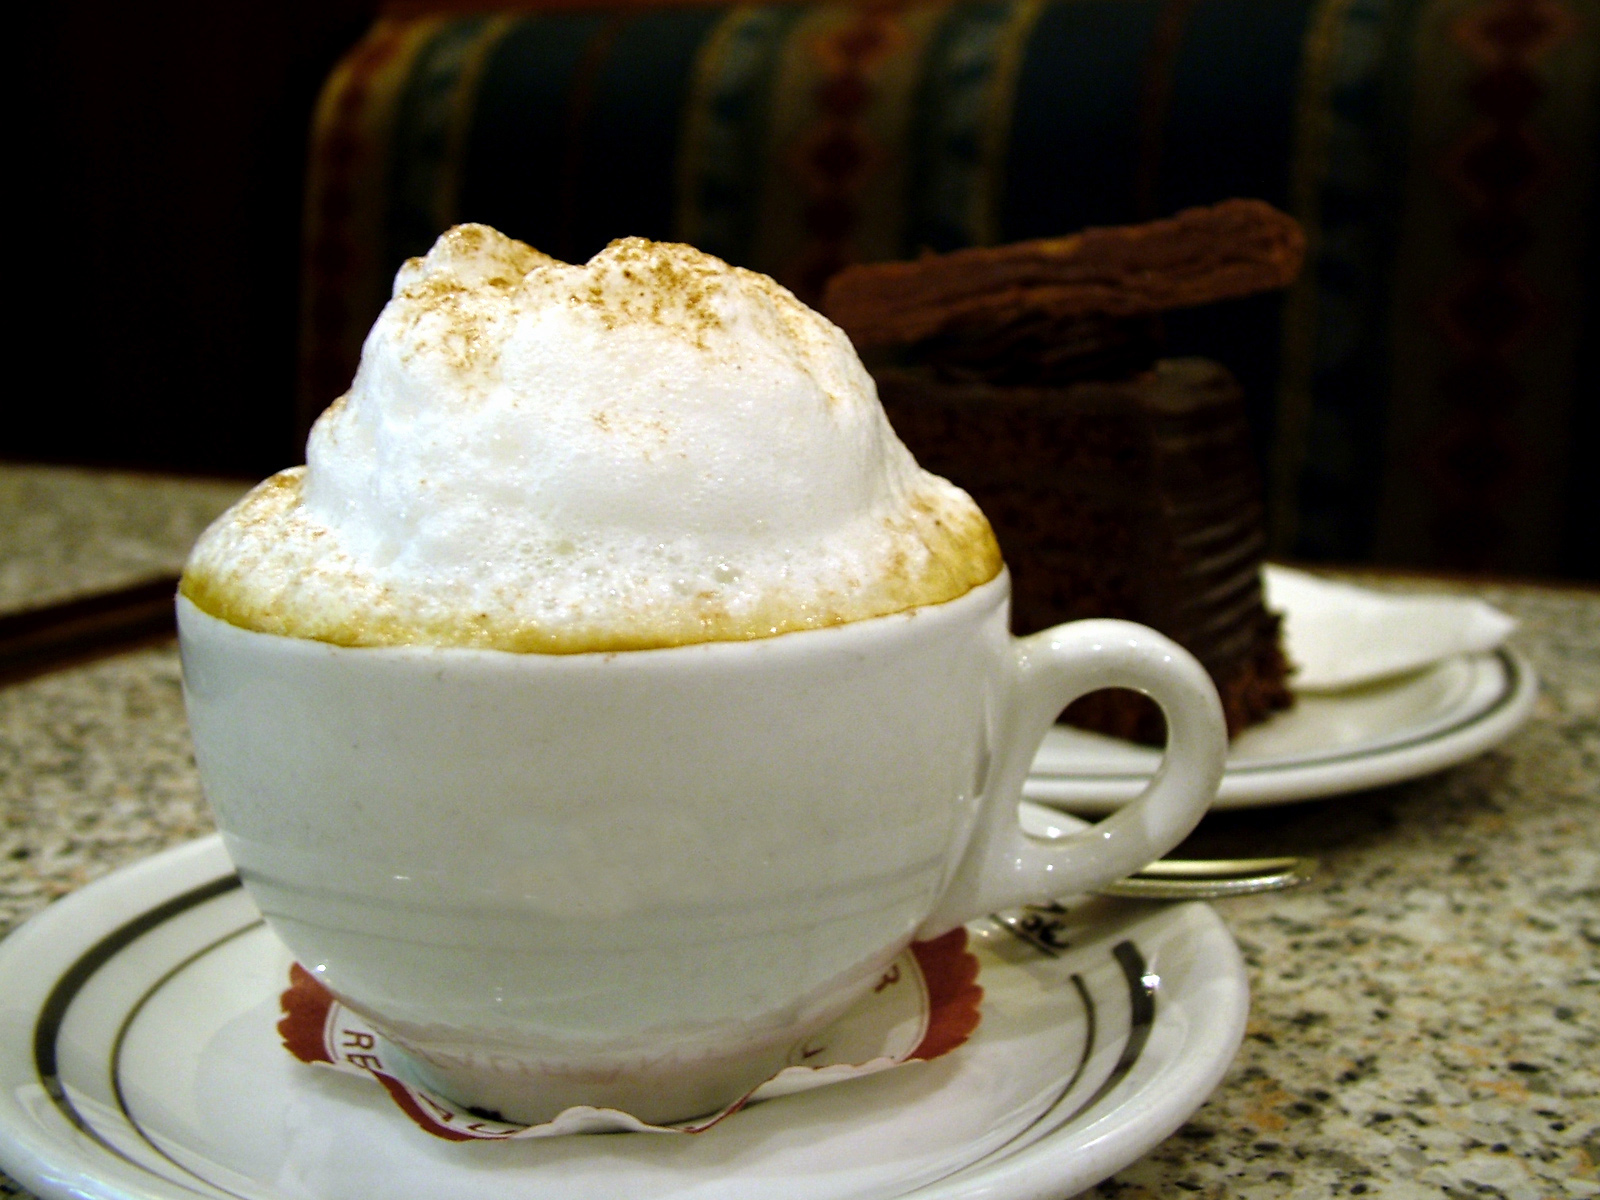 http://upload.wikimedia.org/wikipedia/commons/4/4a/Cup_of_Coffee_with_foam.jpg